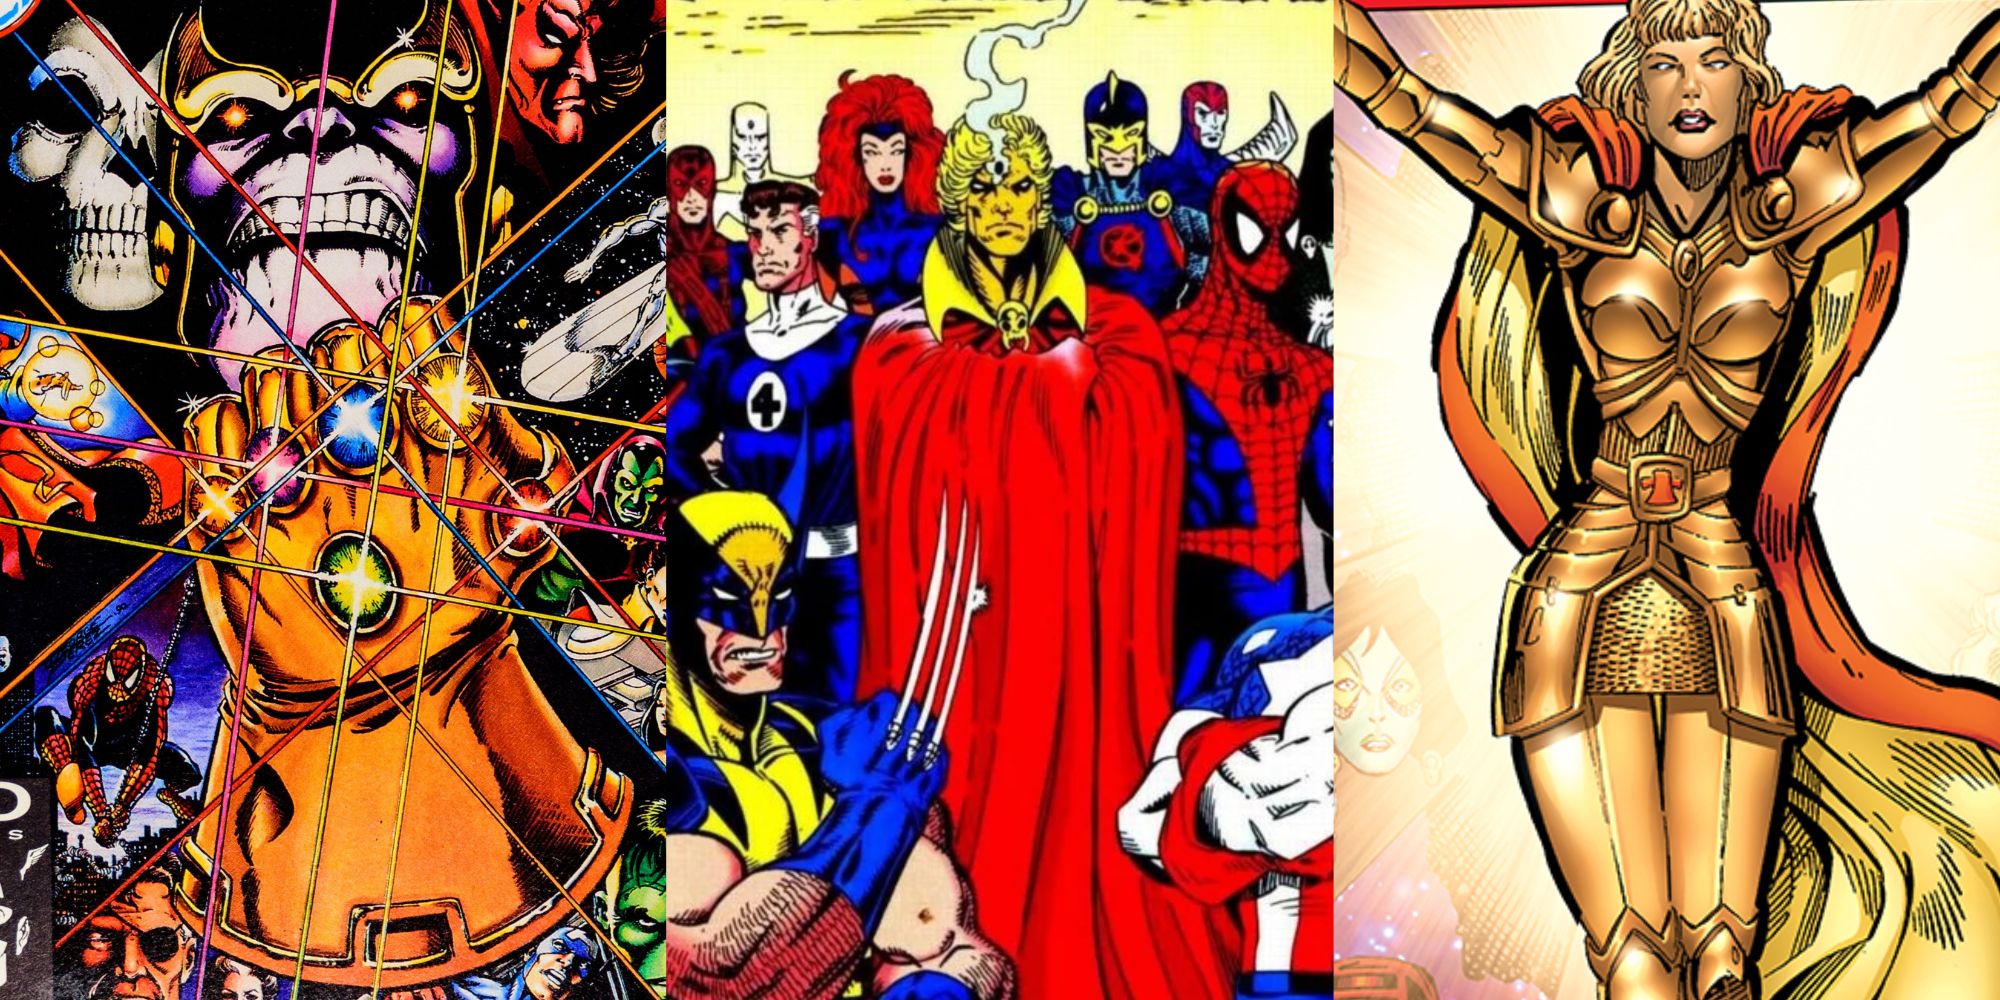 Marvel Comics' Infinity Trilogy, featuring a split image of the Infinity Gauntlet, Infinity War, and Infinity Crusade